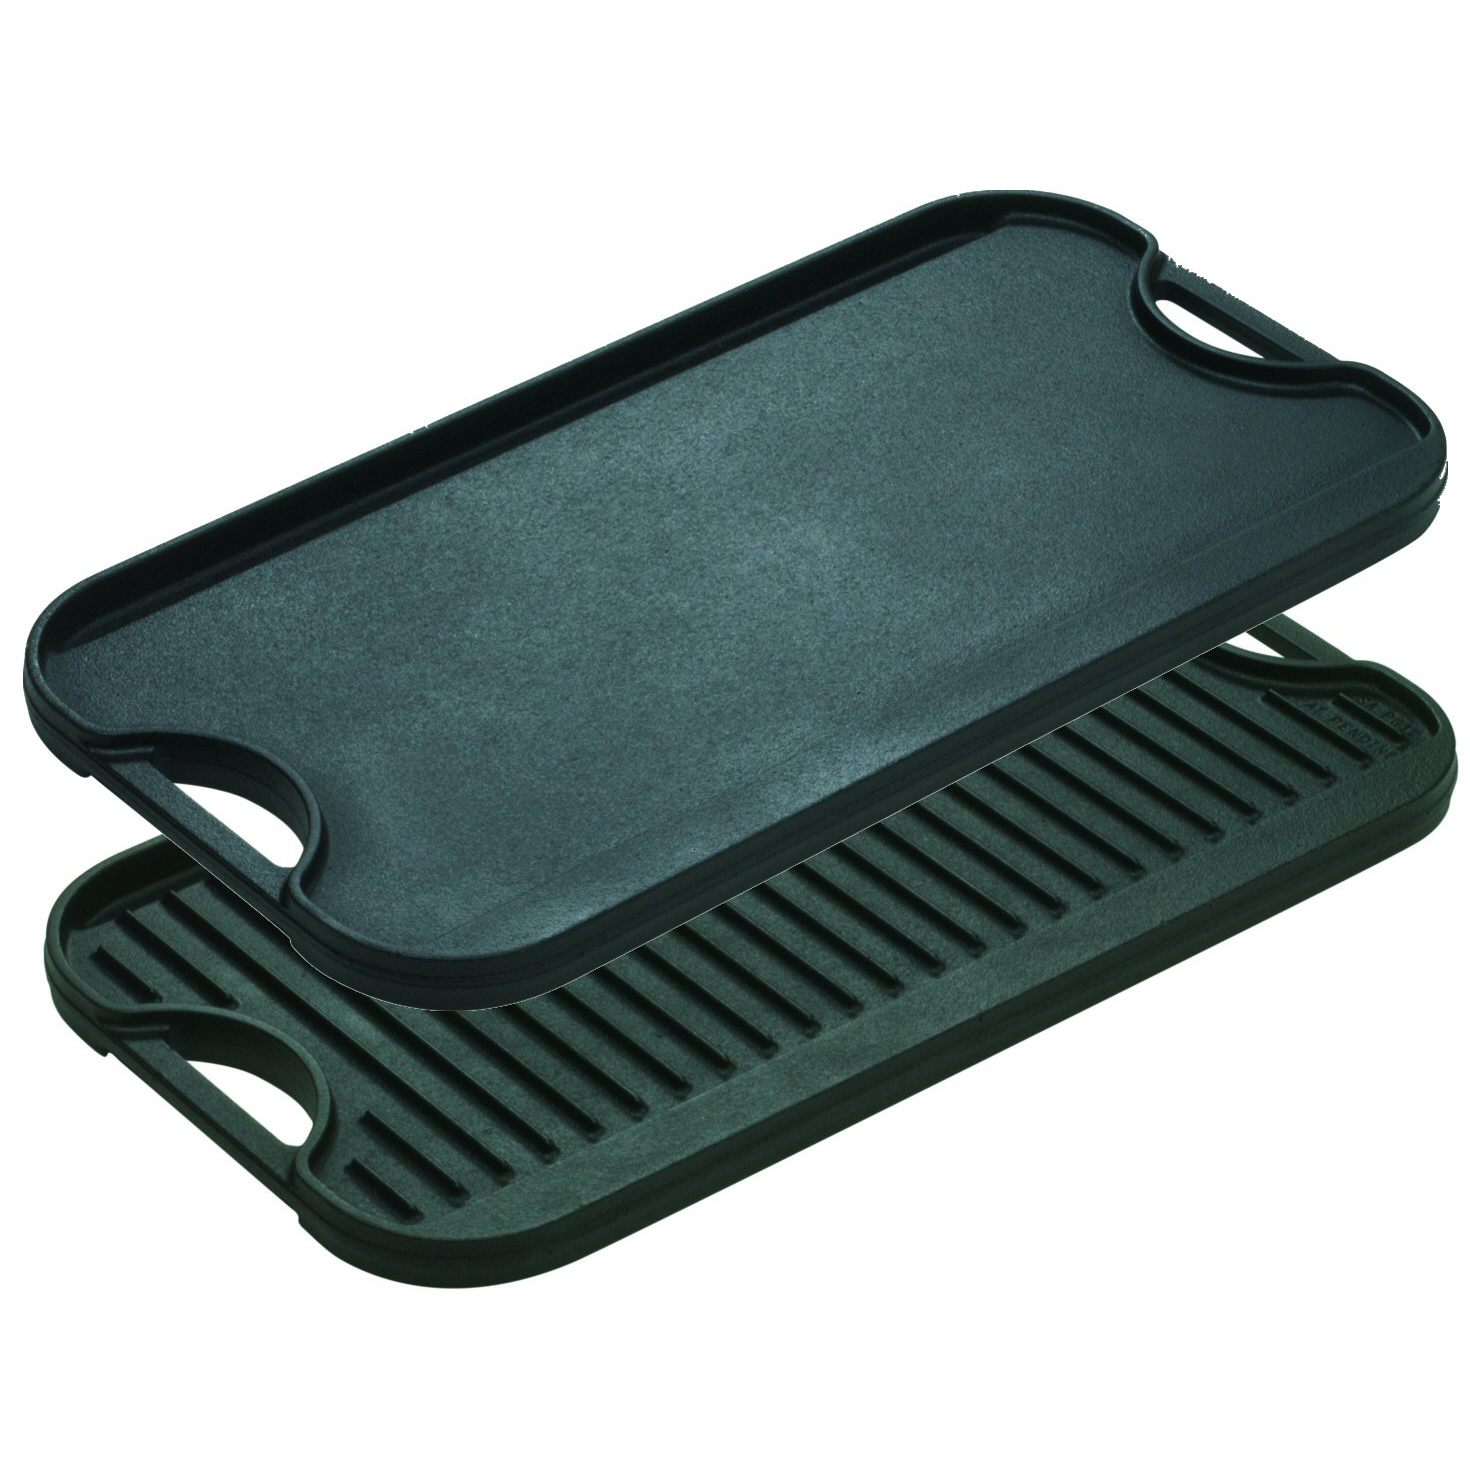 Lodge Cast Iron Seasoned Pro Grid Reversible Grill/Griddle - image 1 of 6